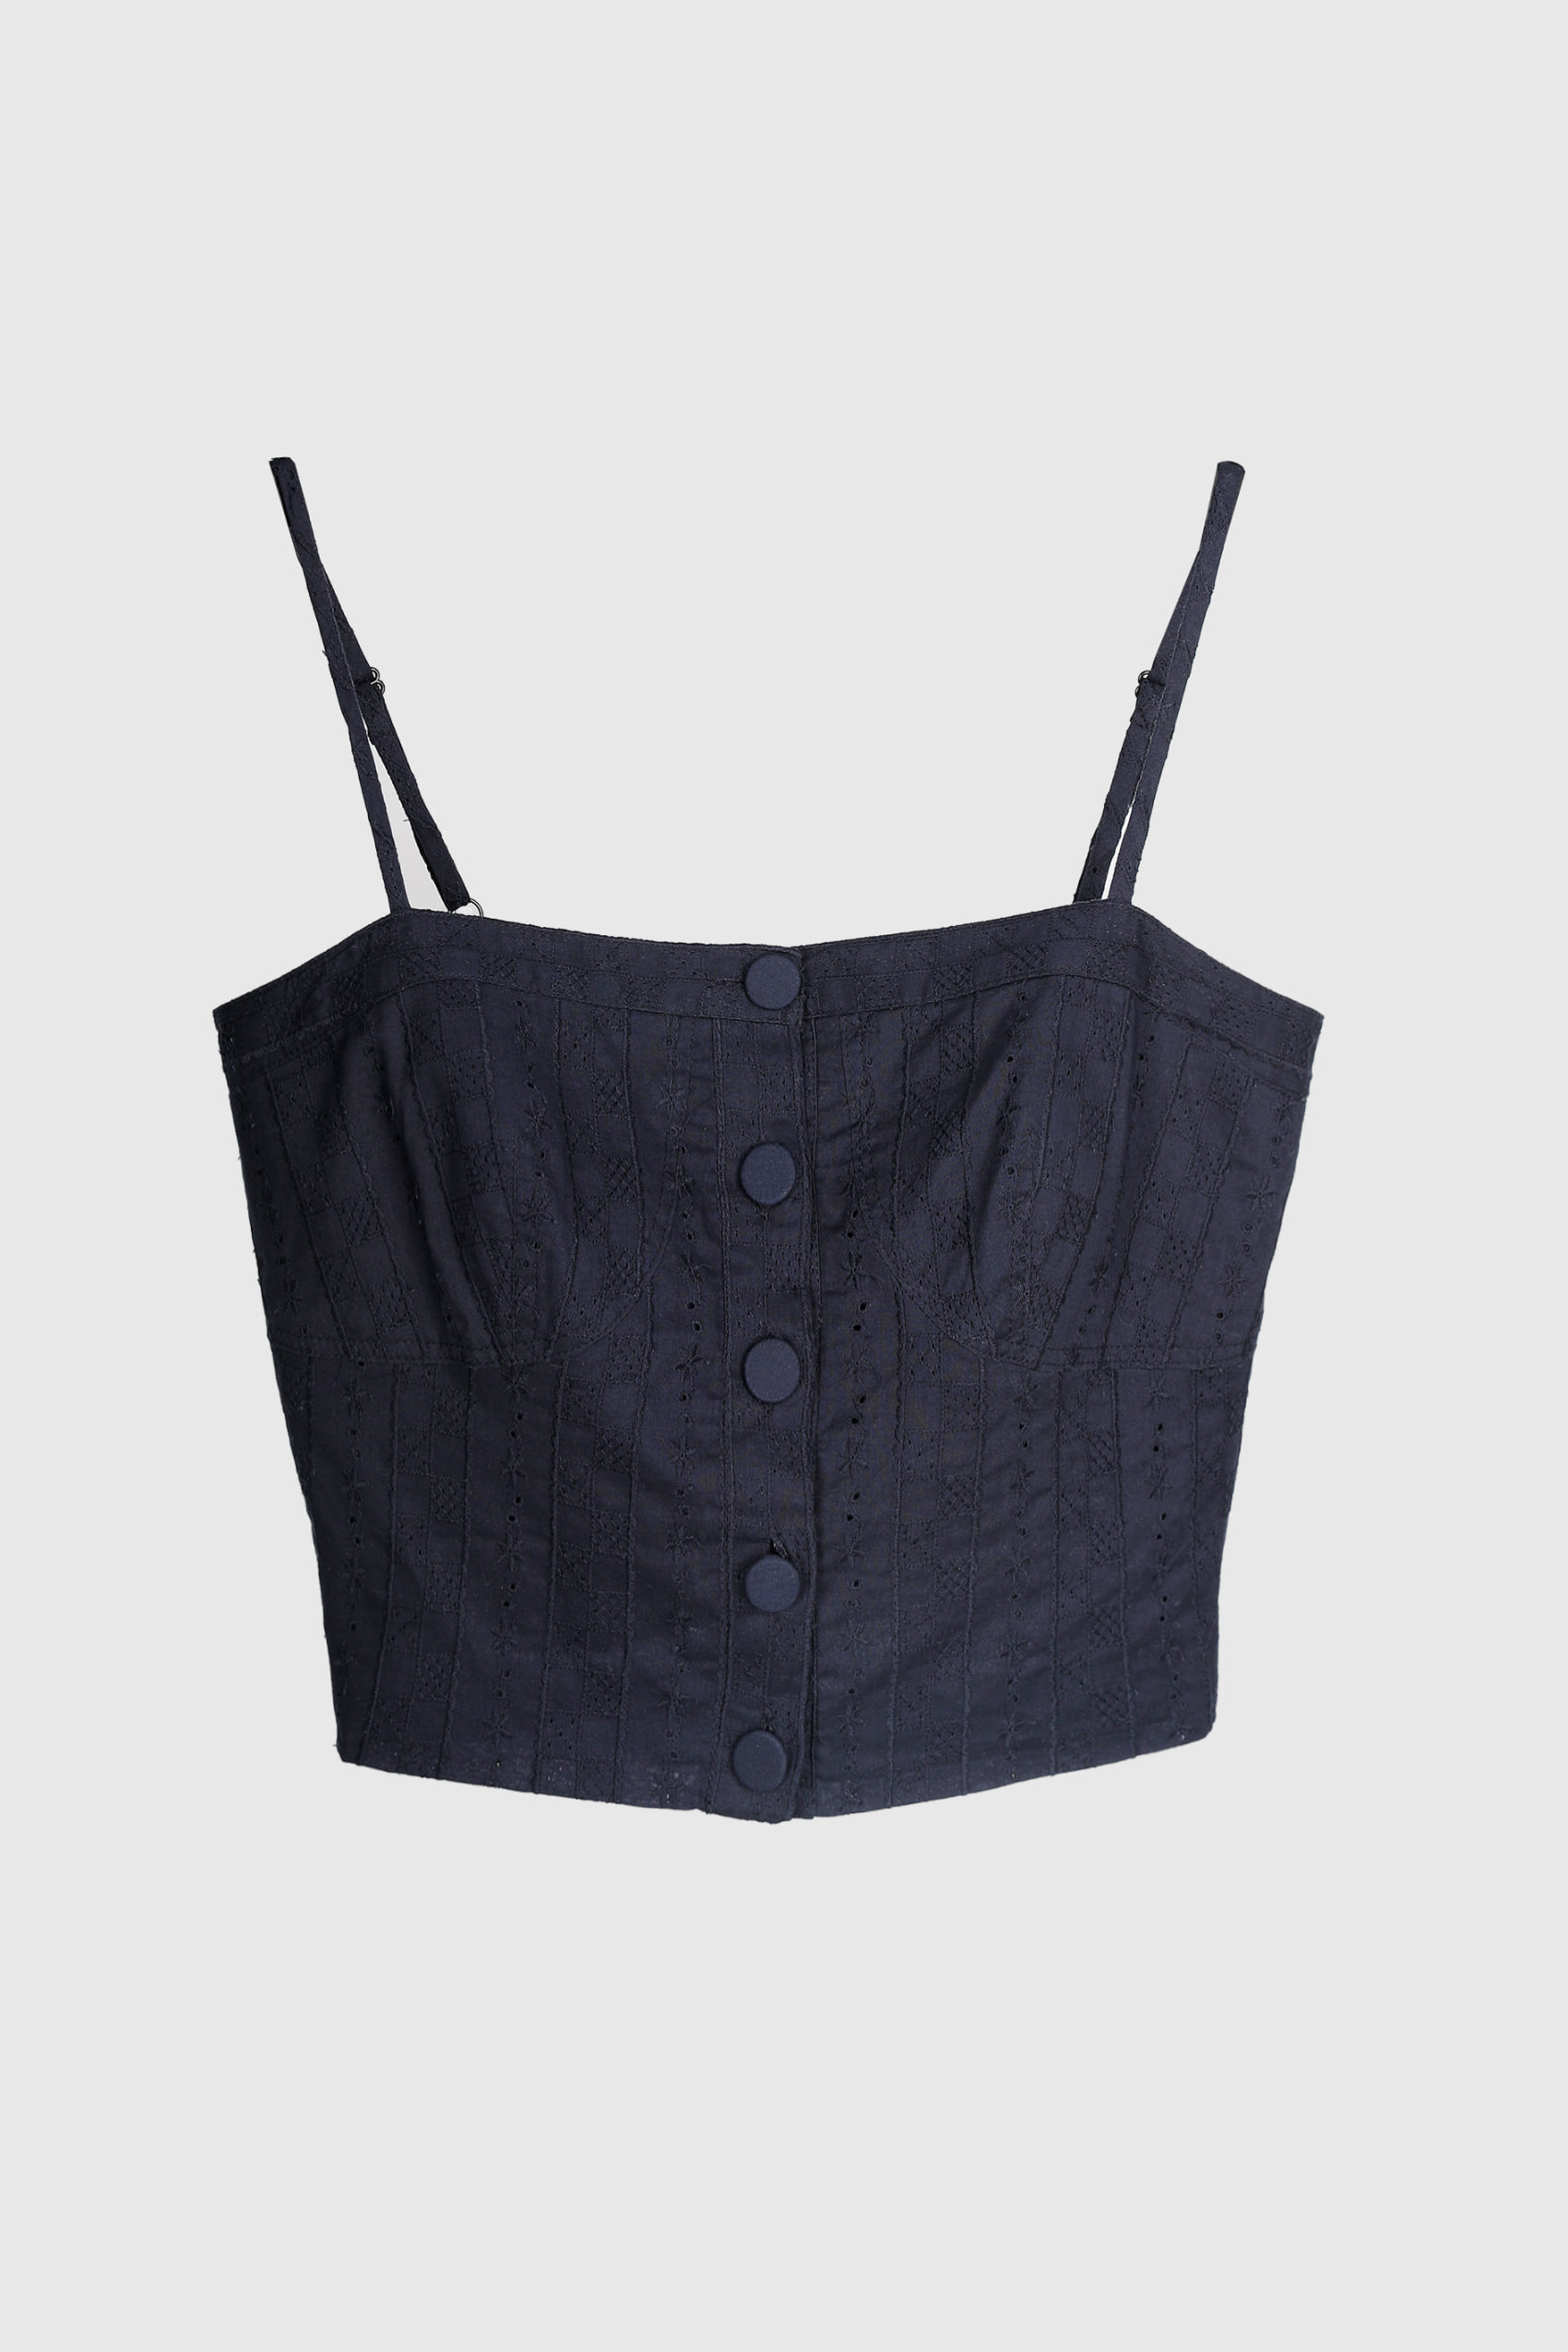 HIGH QUALITY LINE - Eyelet Bustier Crop Top (Fabric by UNI TEXITLE, Made in JAPAN)